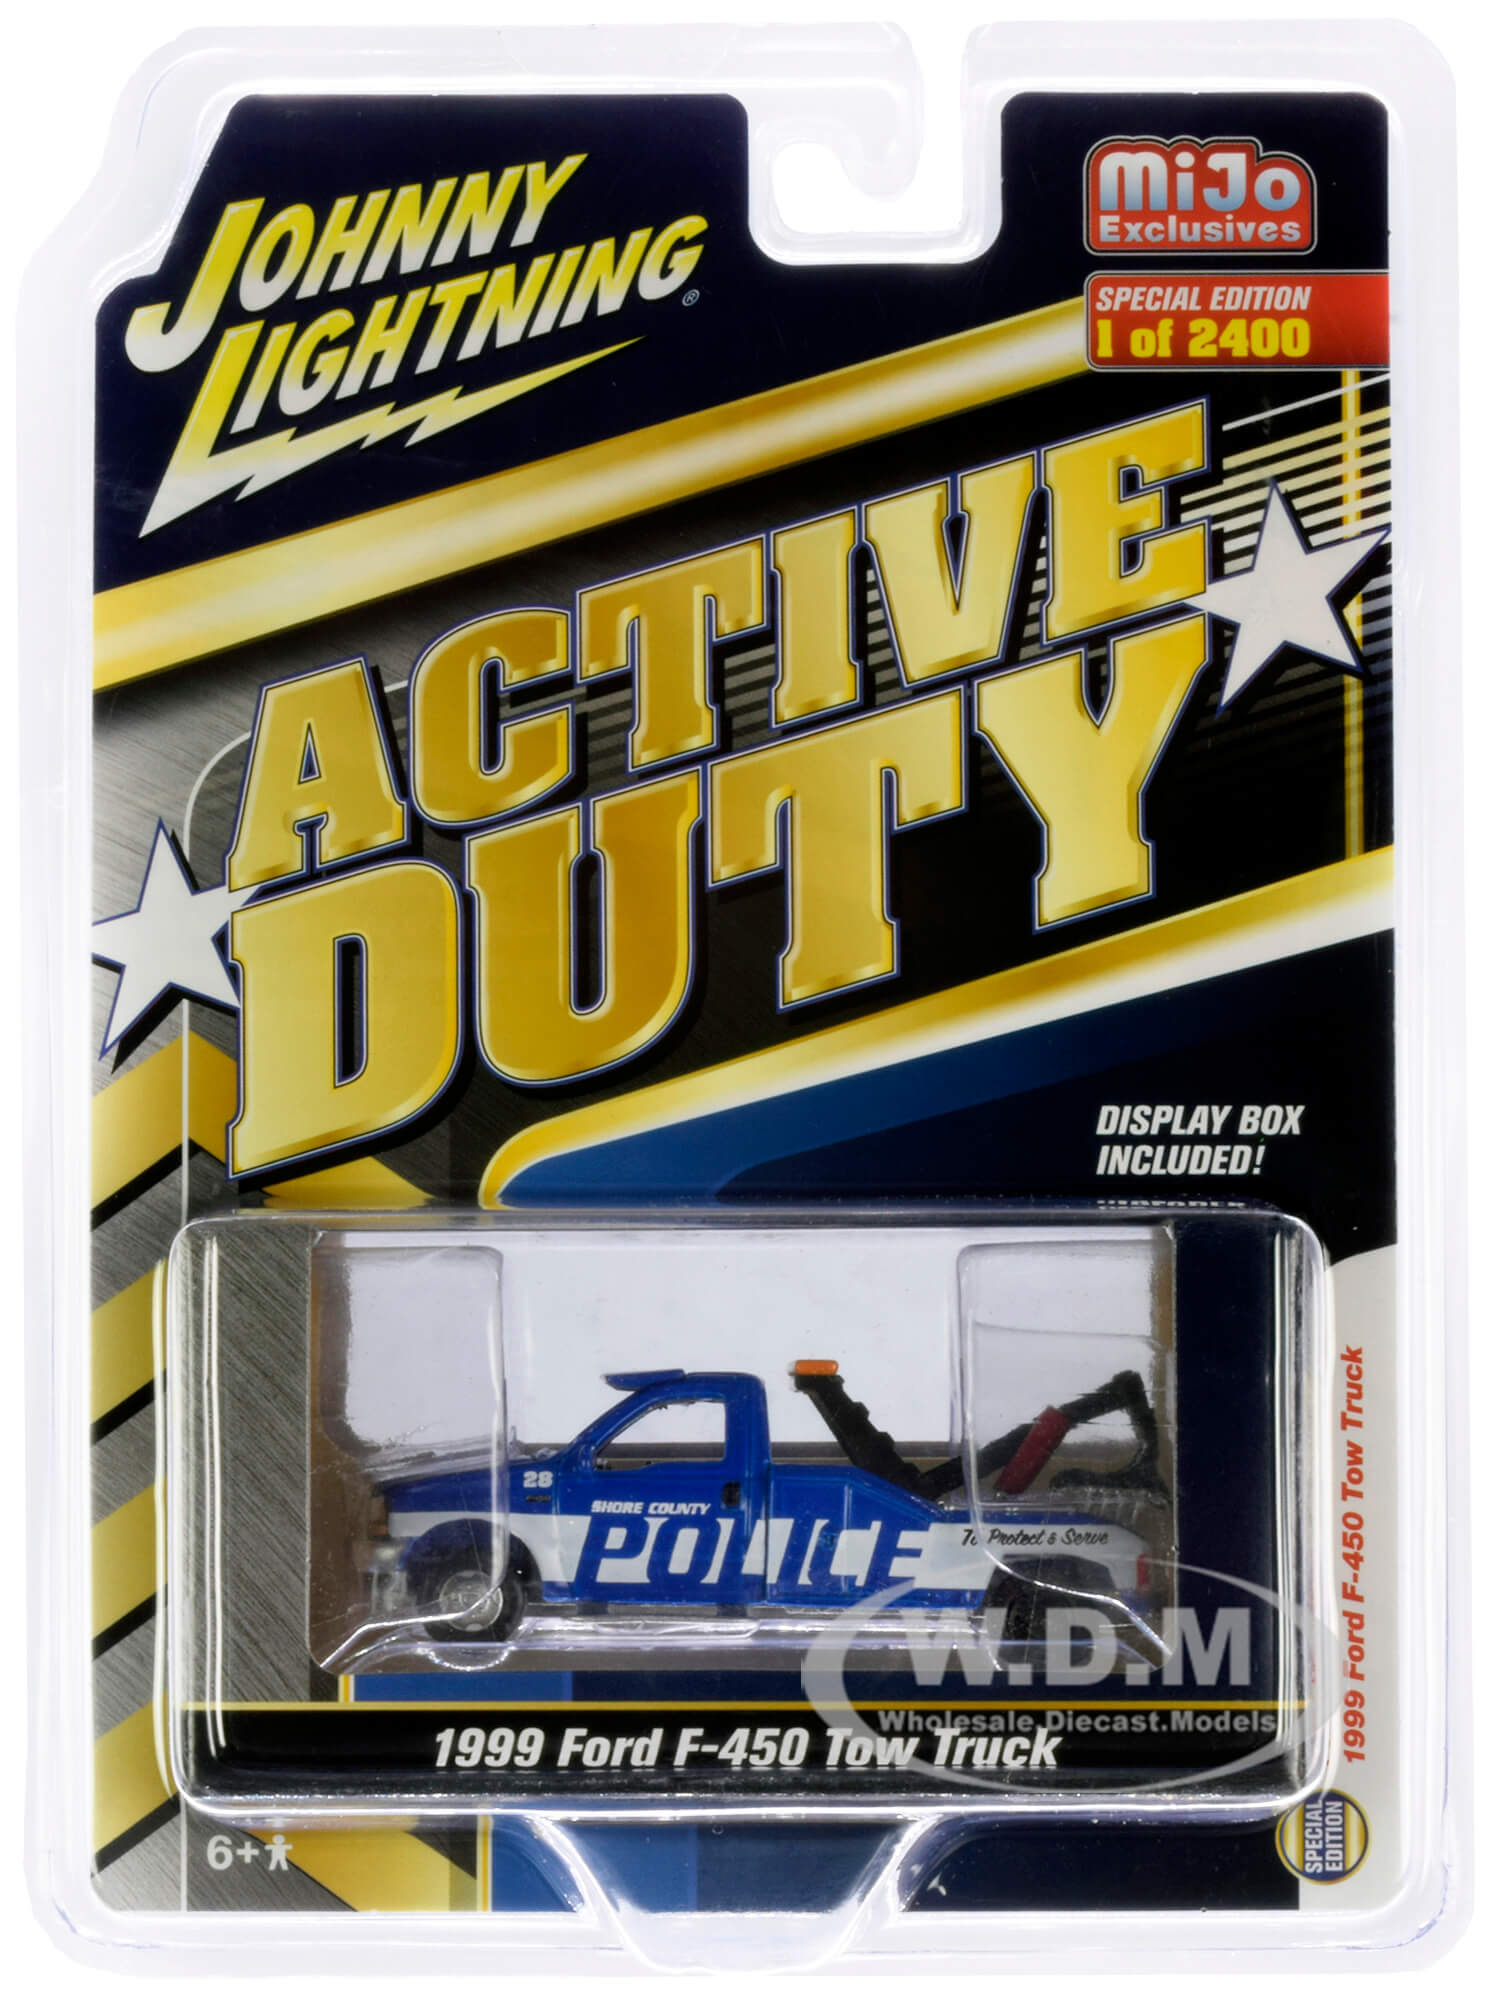 1999 Ford F-450 Police Tow Truck Blue with White Stripes "Active Duty" Limited Edition to 2400 pieces Worldwide 1/64 Diecast Model by Johnny Lightnin